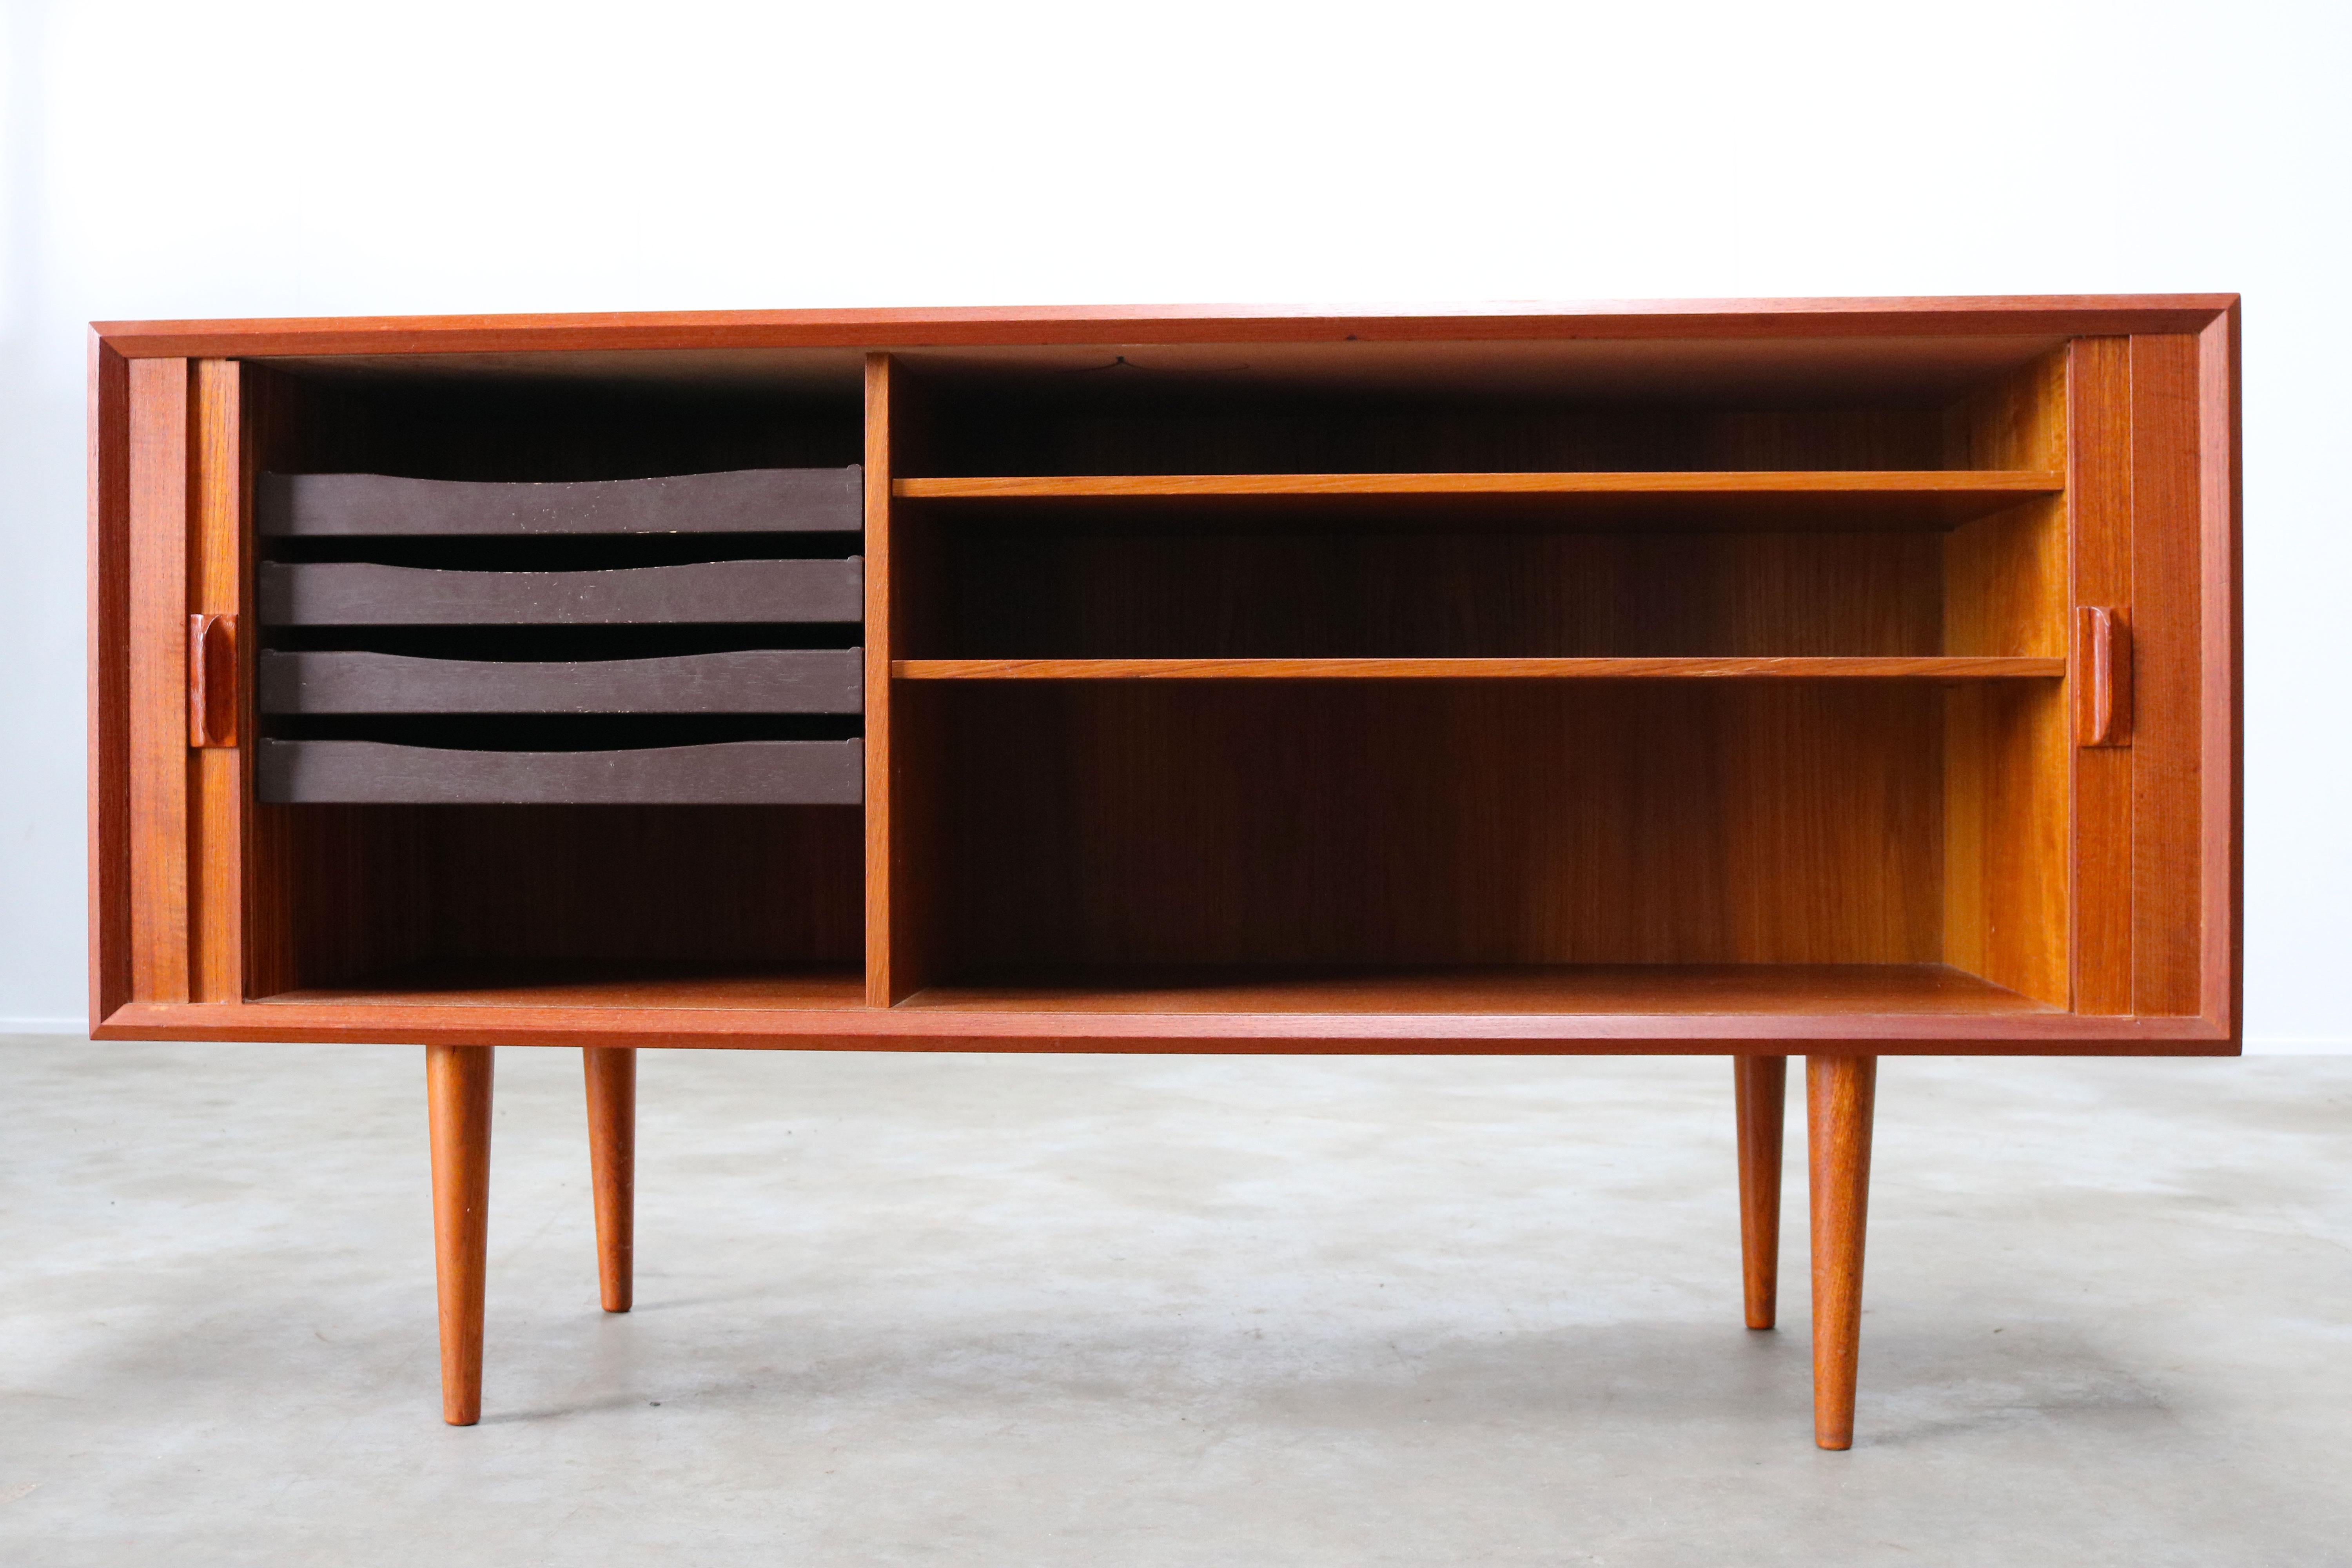 Small Rare Danish Sideboard / Credenza by Svend Aage Madsen for Faarup 1950 Teak 1